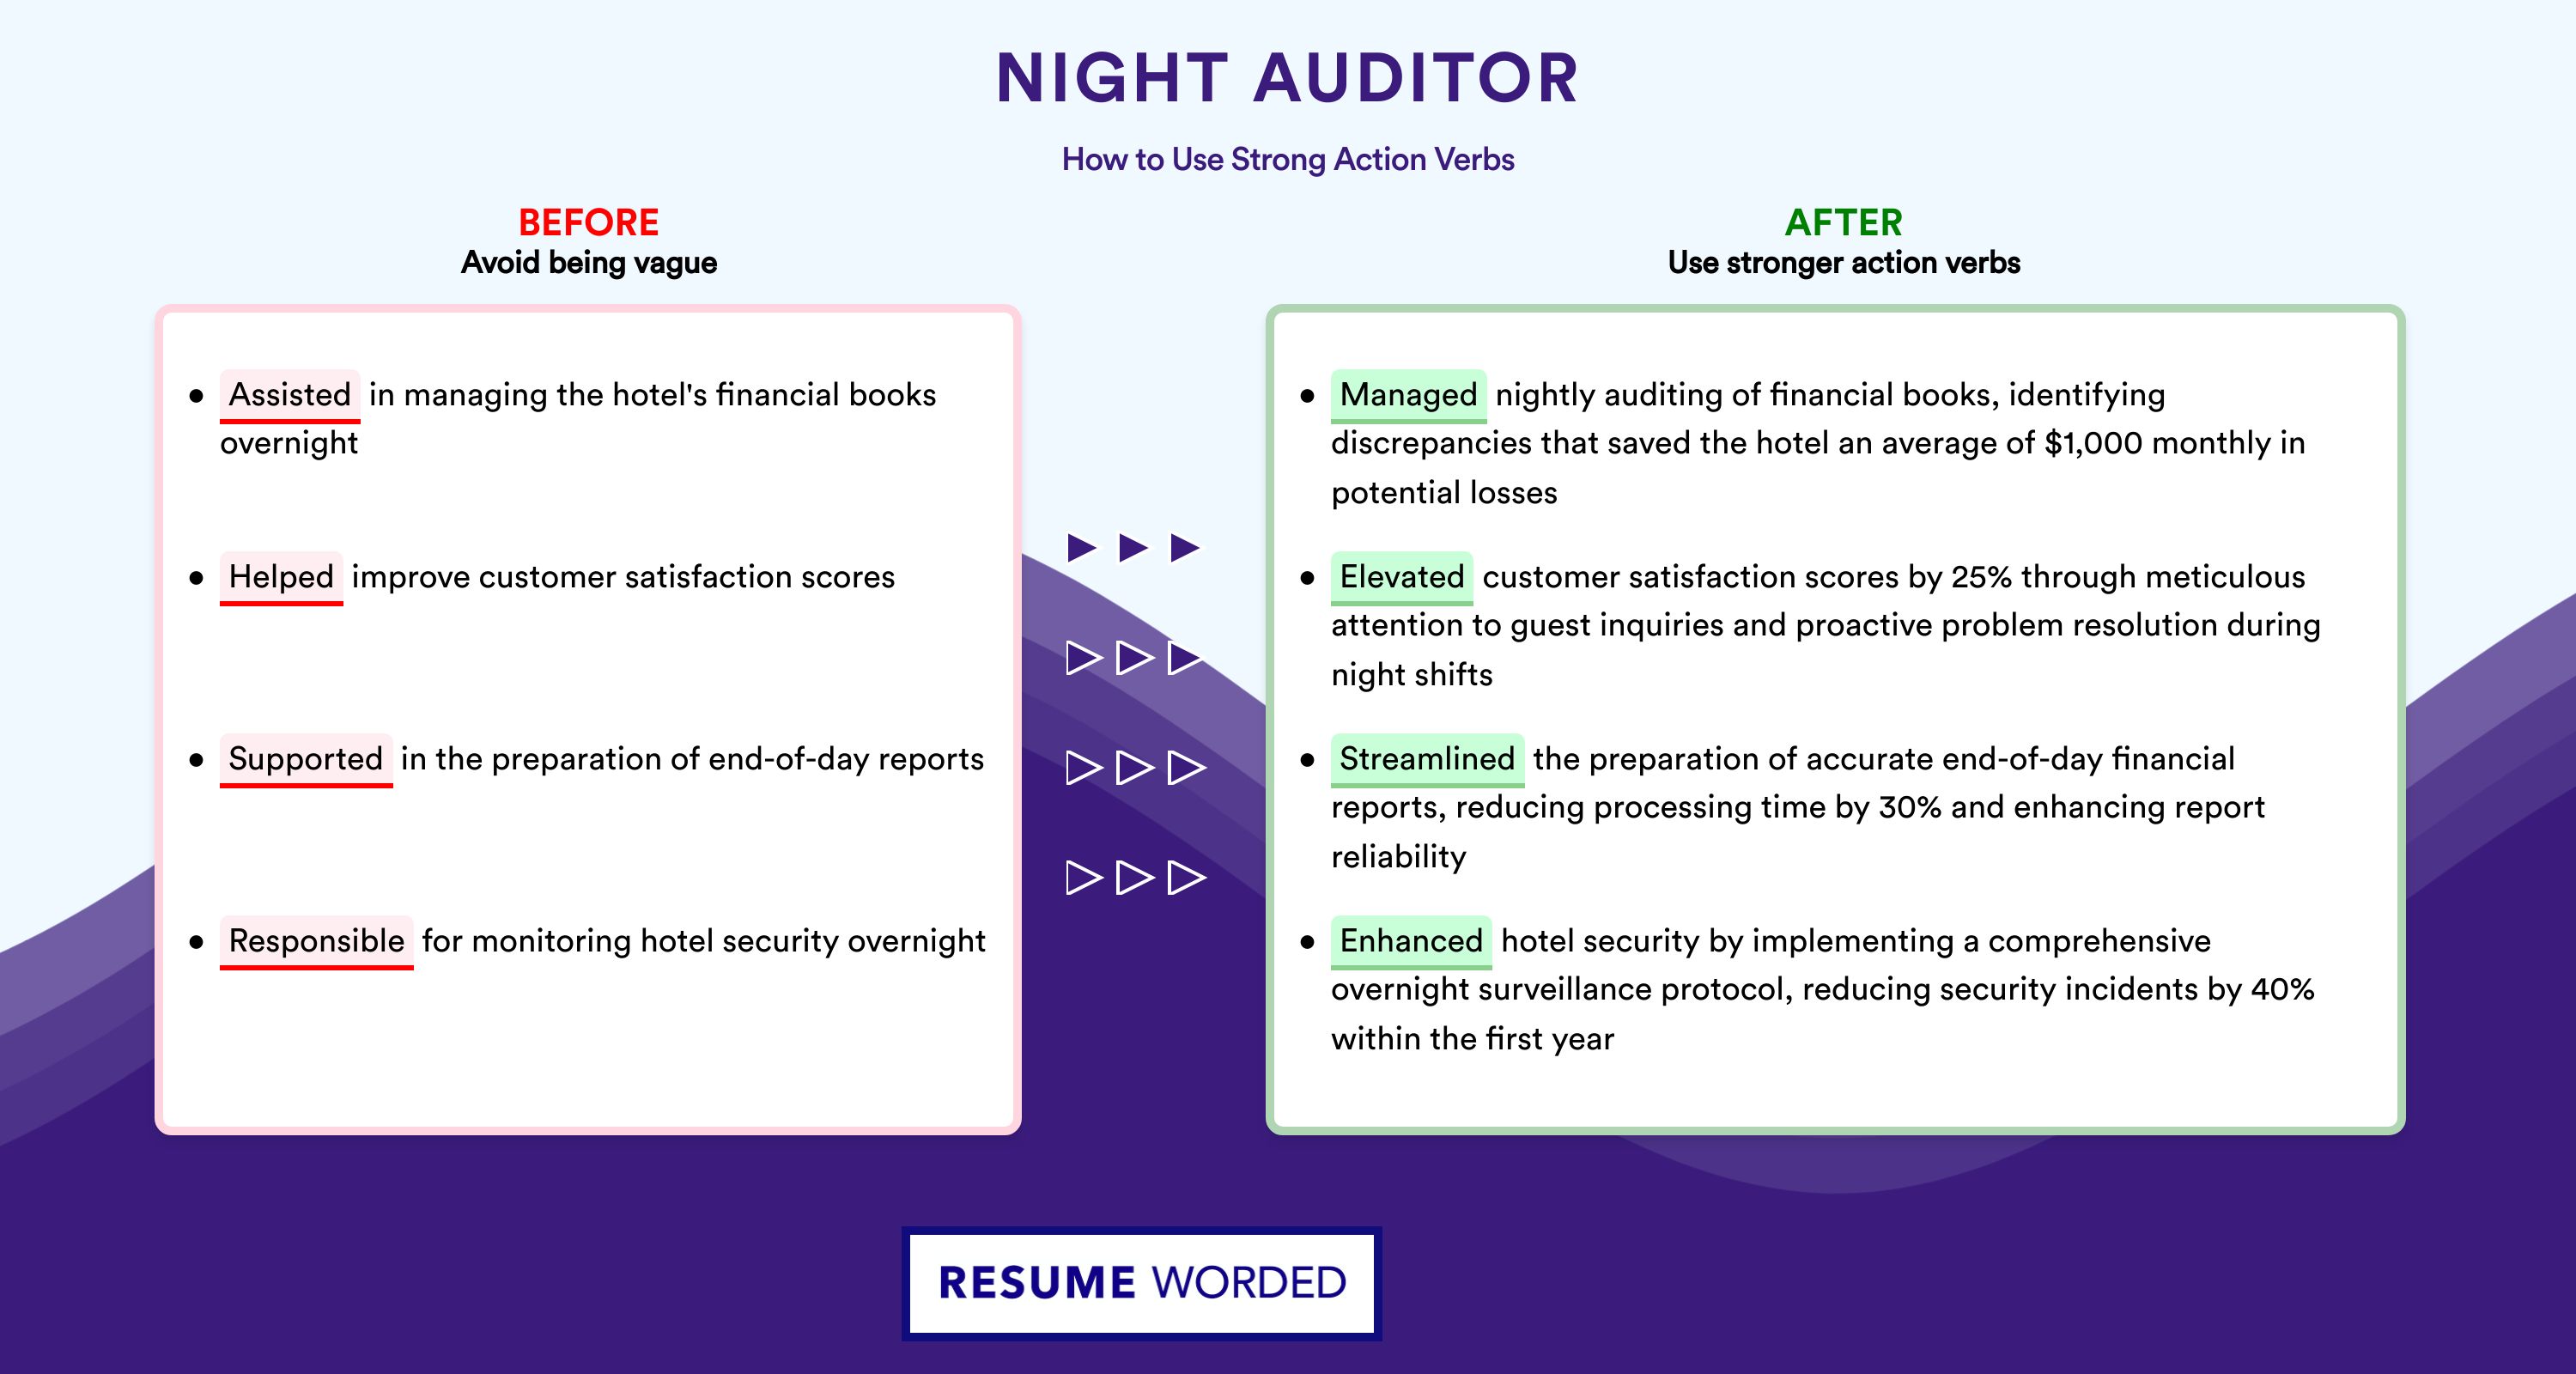 Action Verbs for Night Auditor